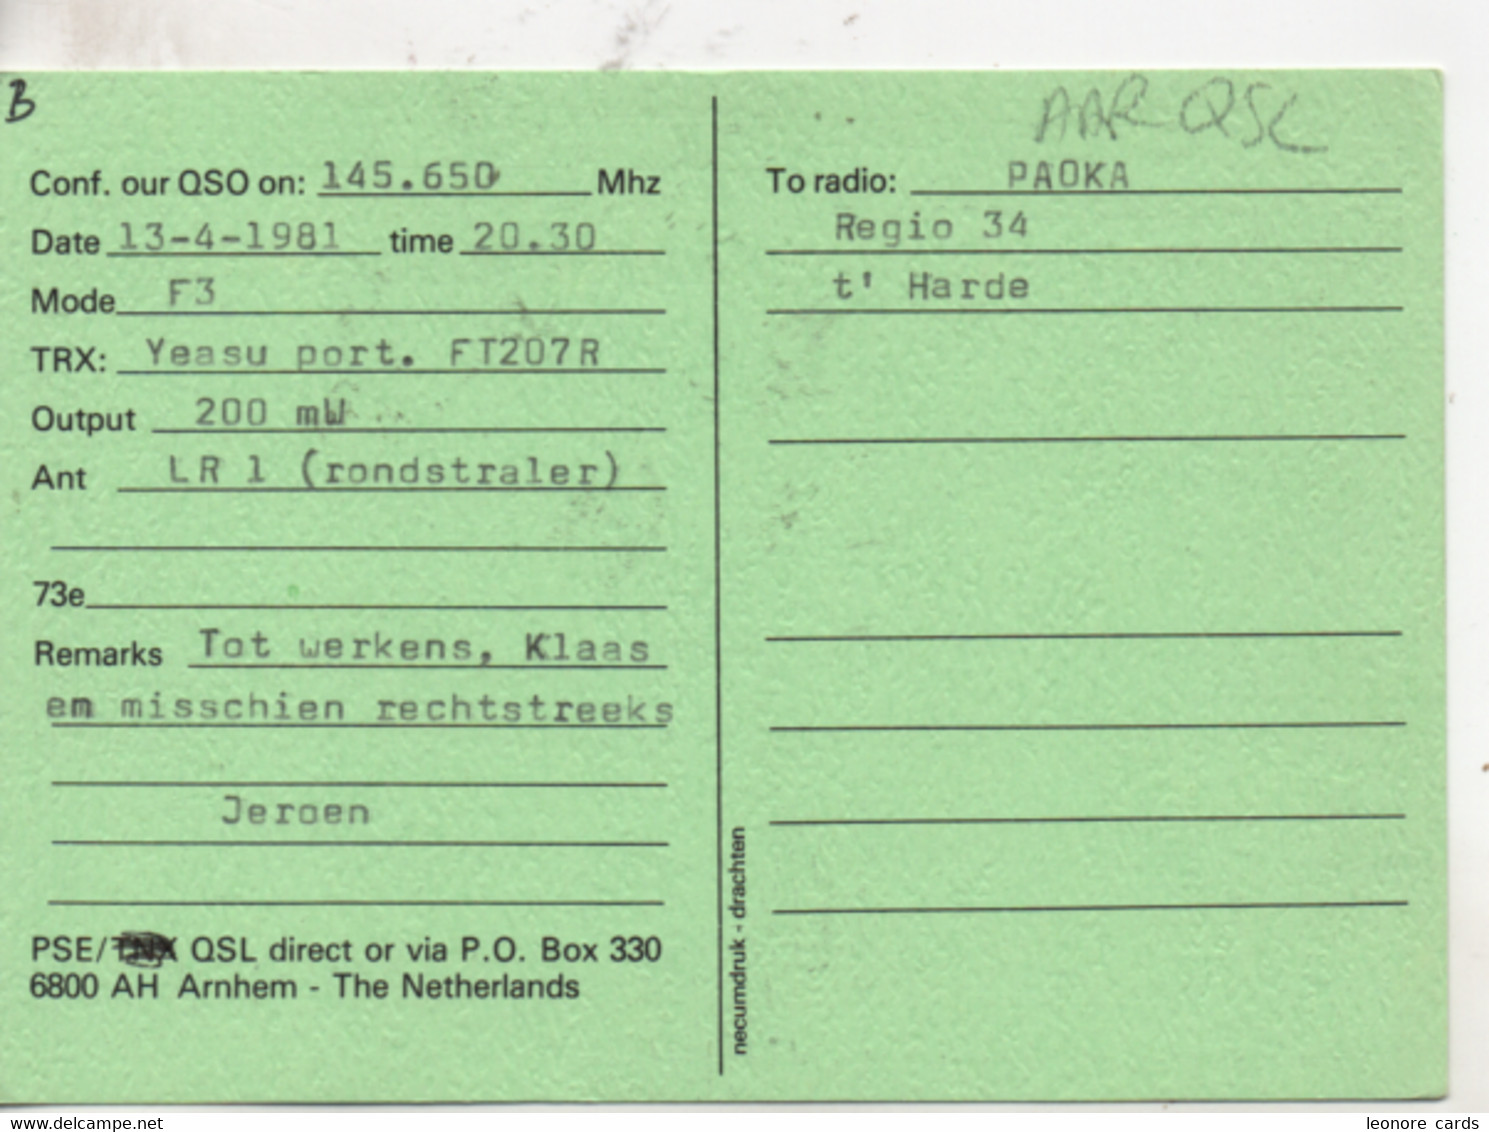 Cpa.Cartes QSL.PE1FDT.The Nederlands.1981.to PAOKA - Radio Amateur